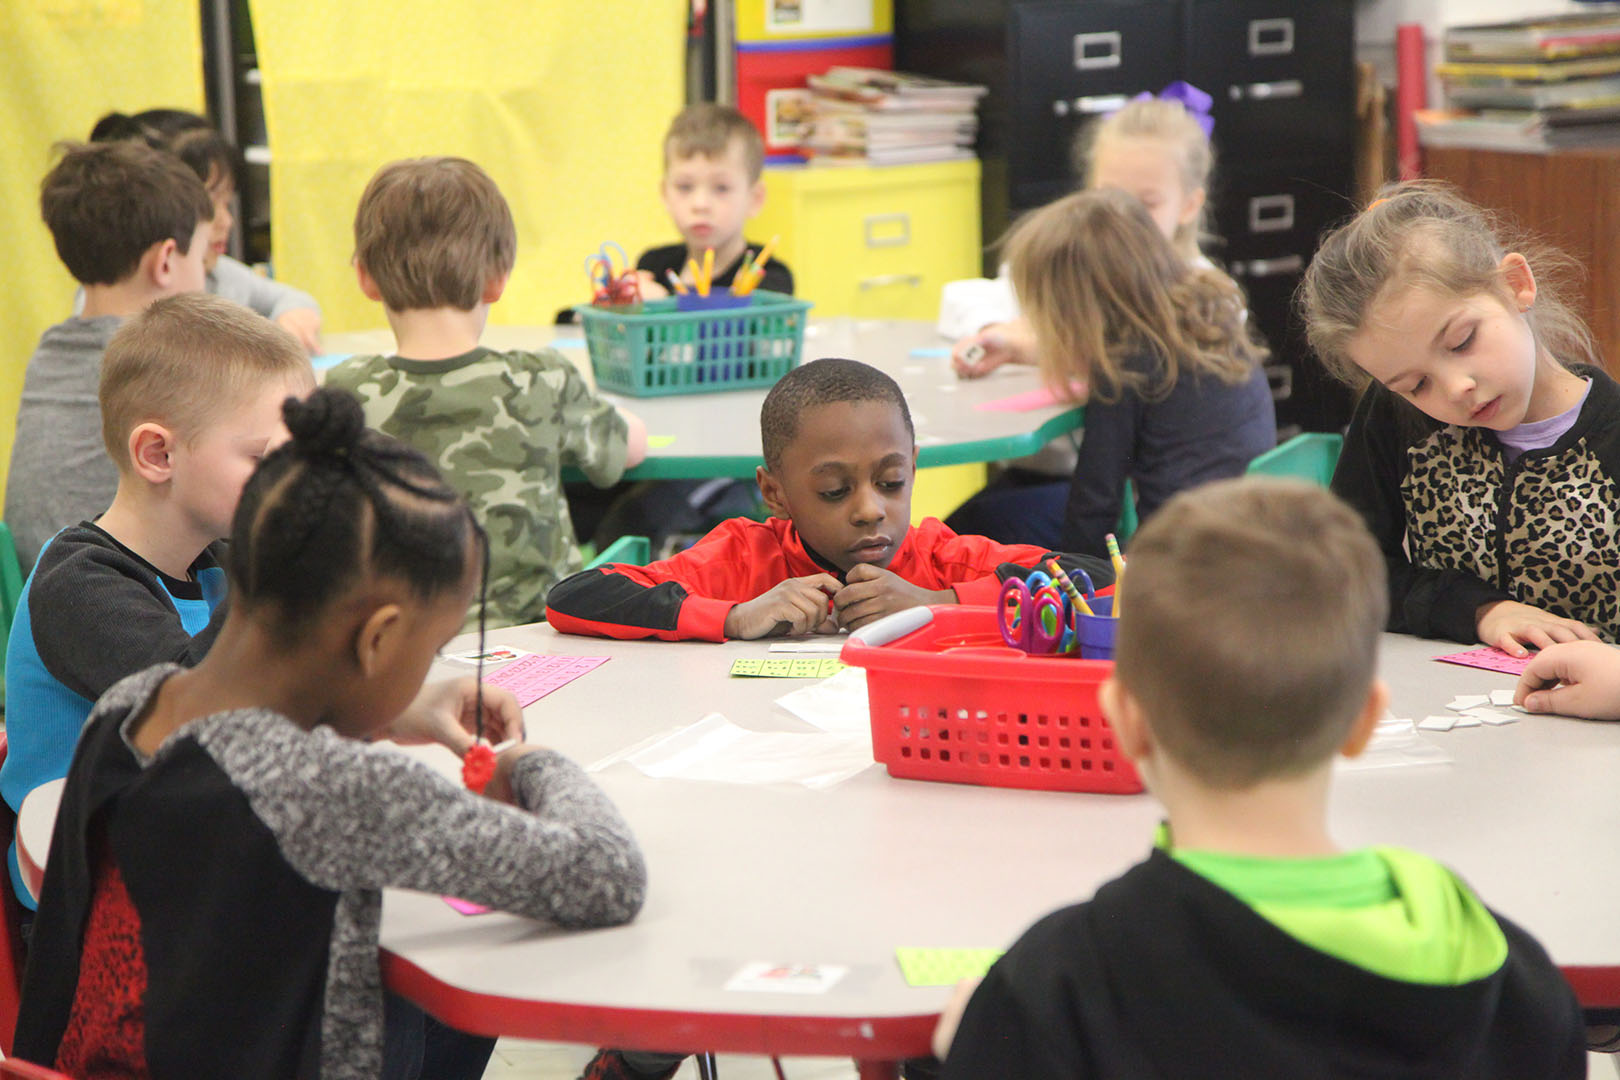 Students at Huntertown Elementary School work around a table in 2019.